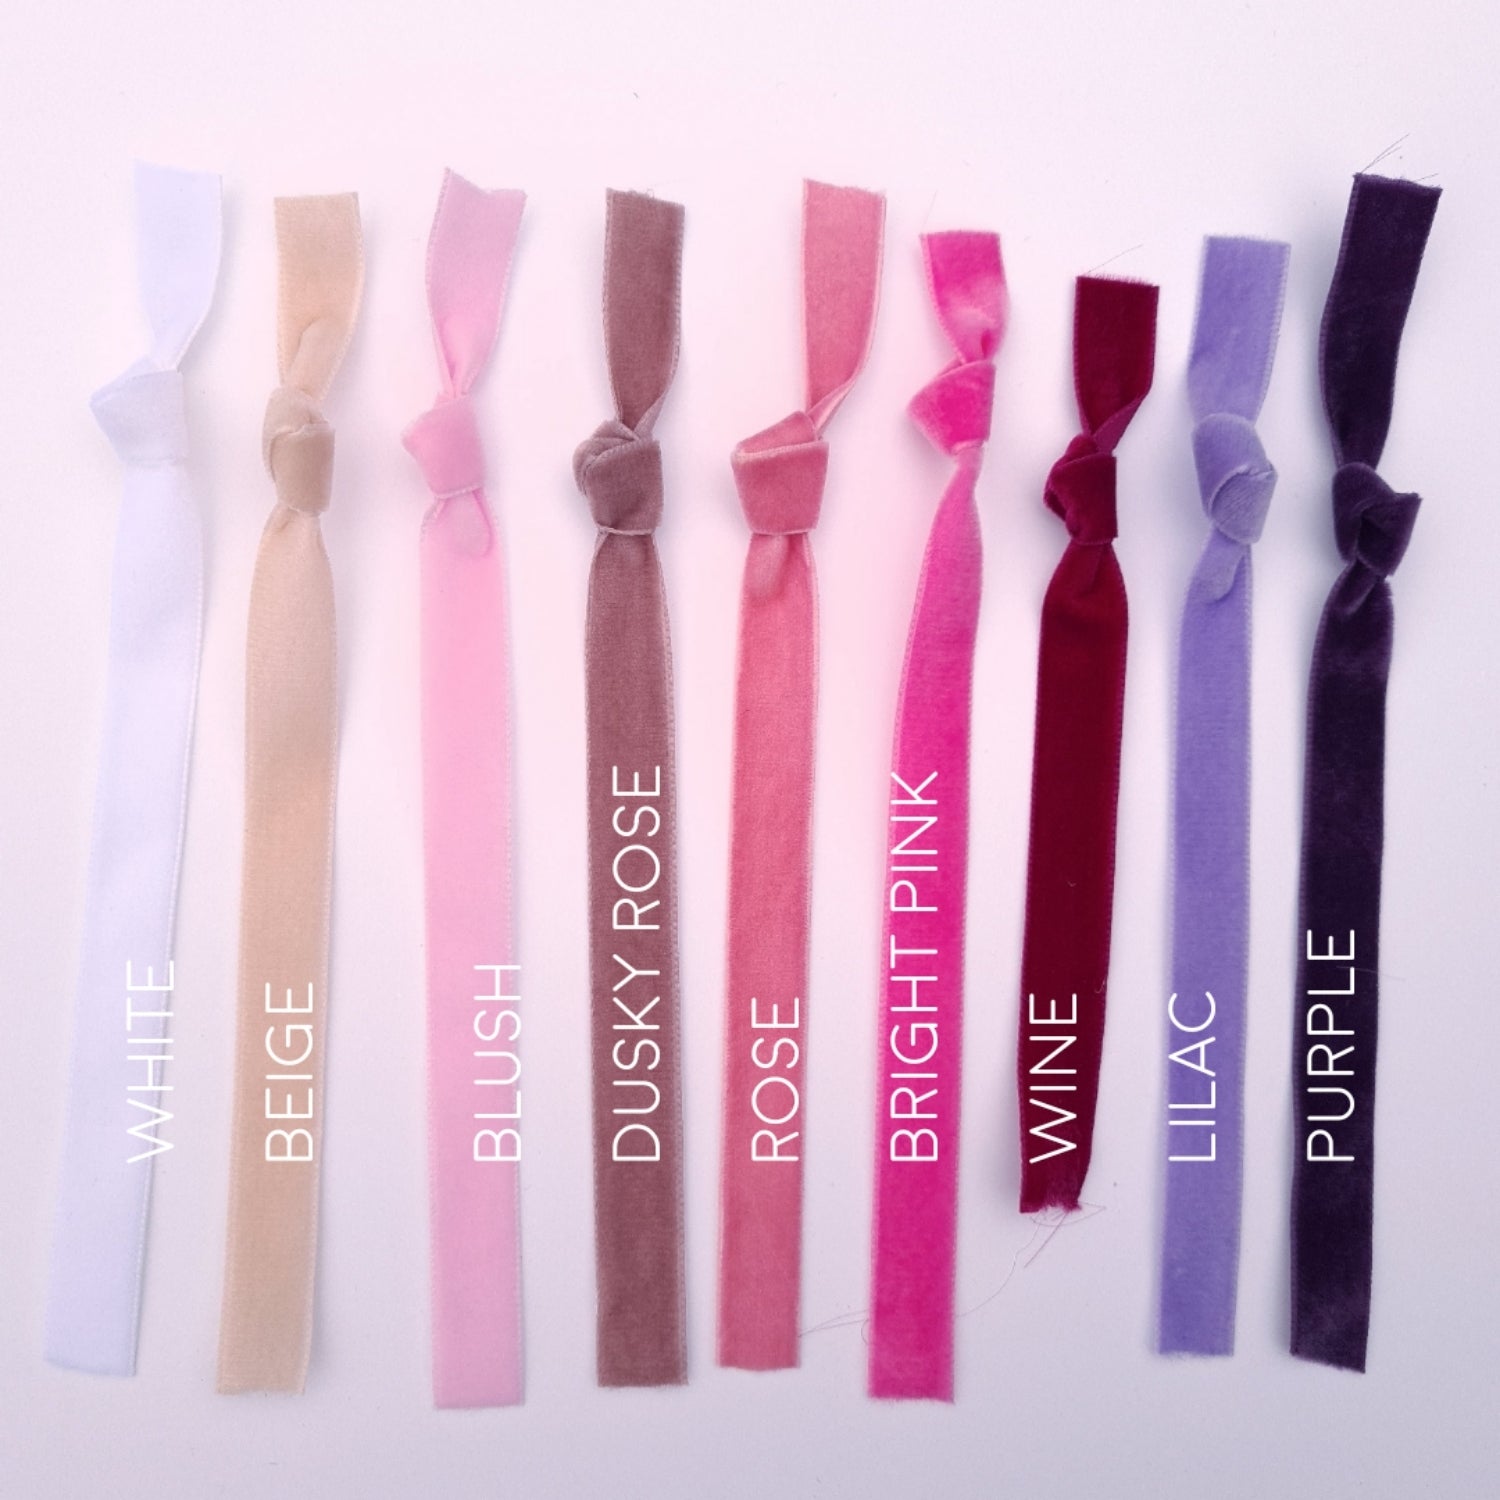 Velvet ribbons in white, beige, blush, dusky rose, rose, bright pink, wine, lilac and purple